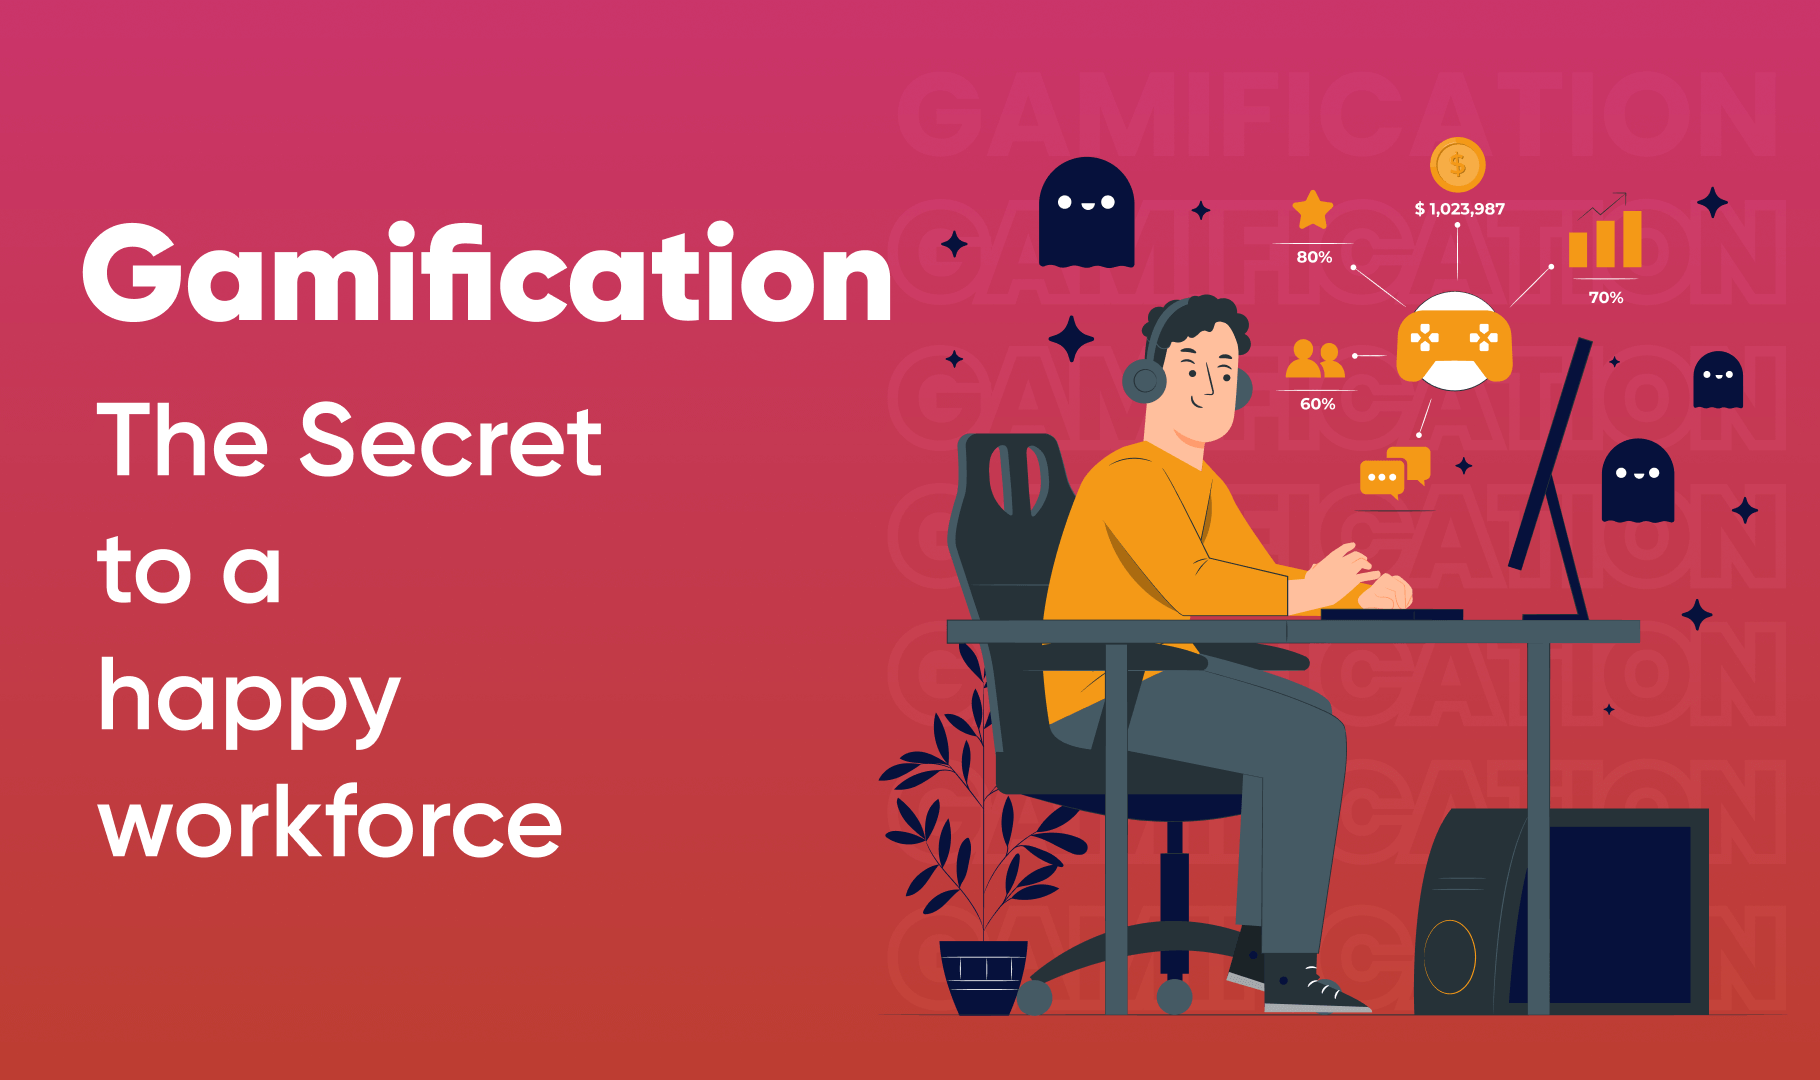 Gamification: The secret to a happy workforce